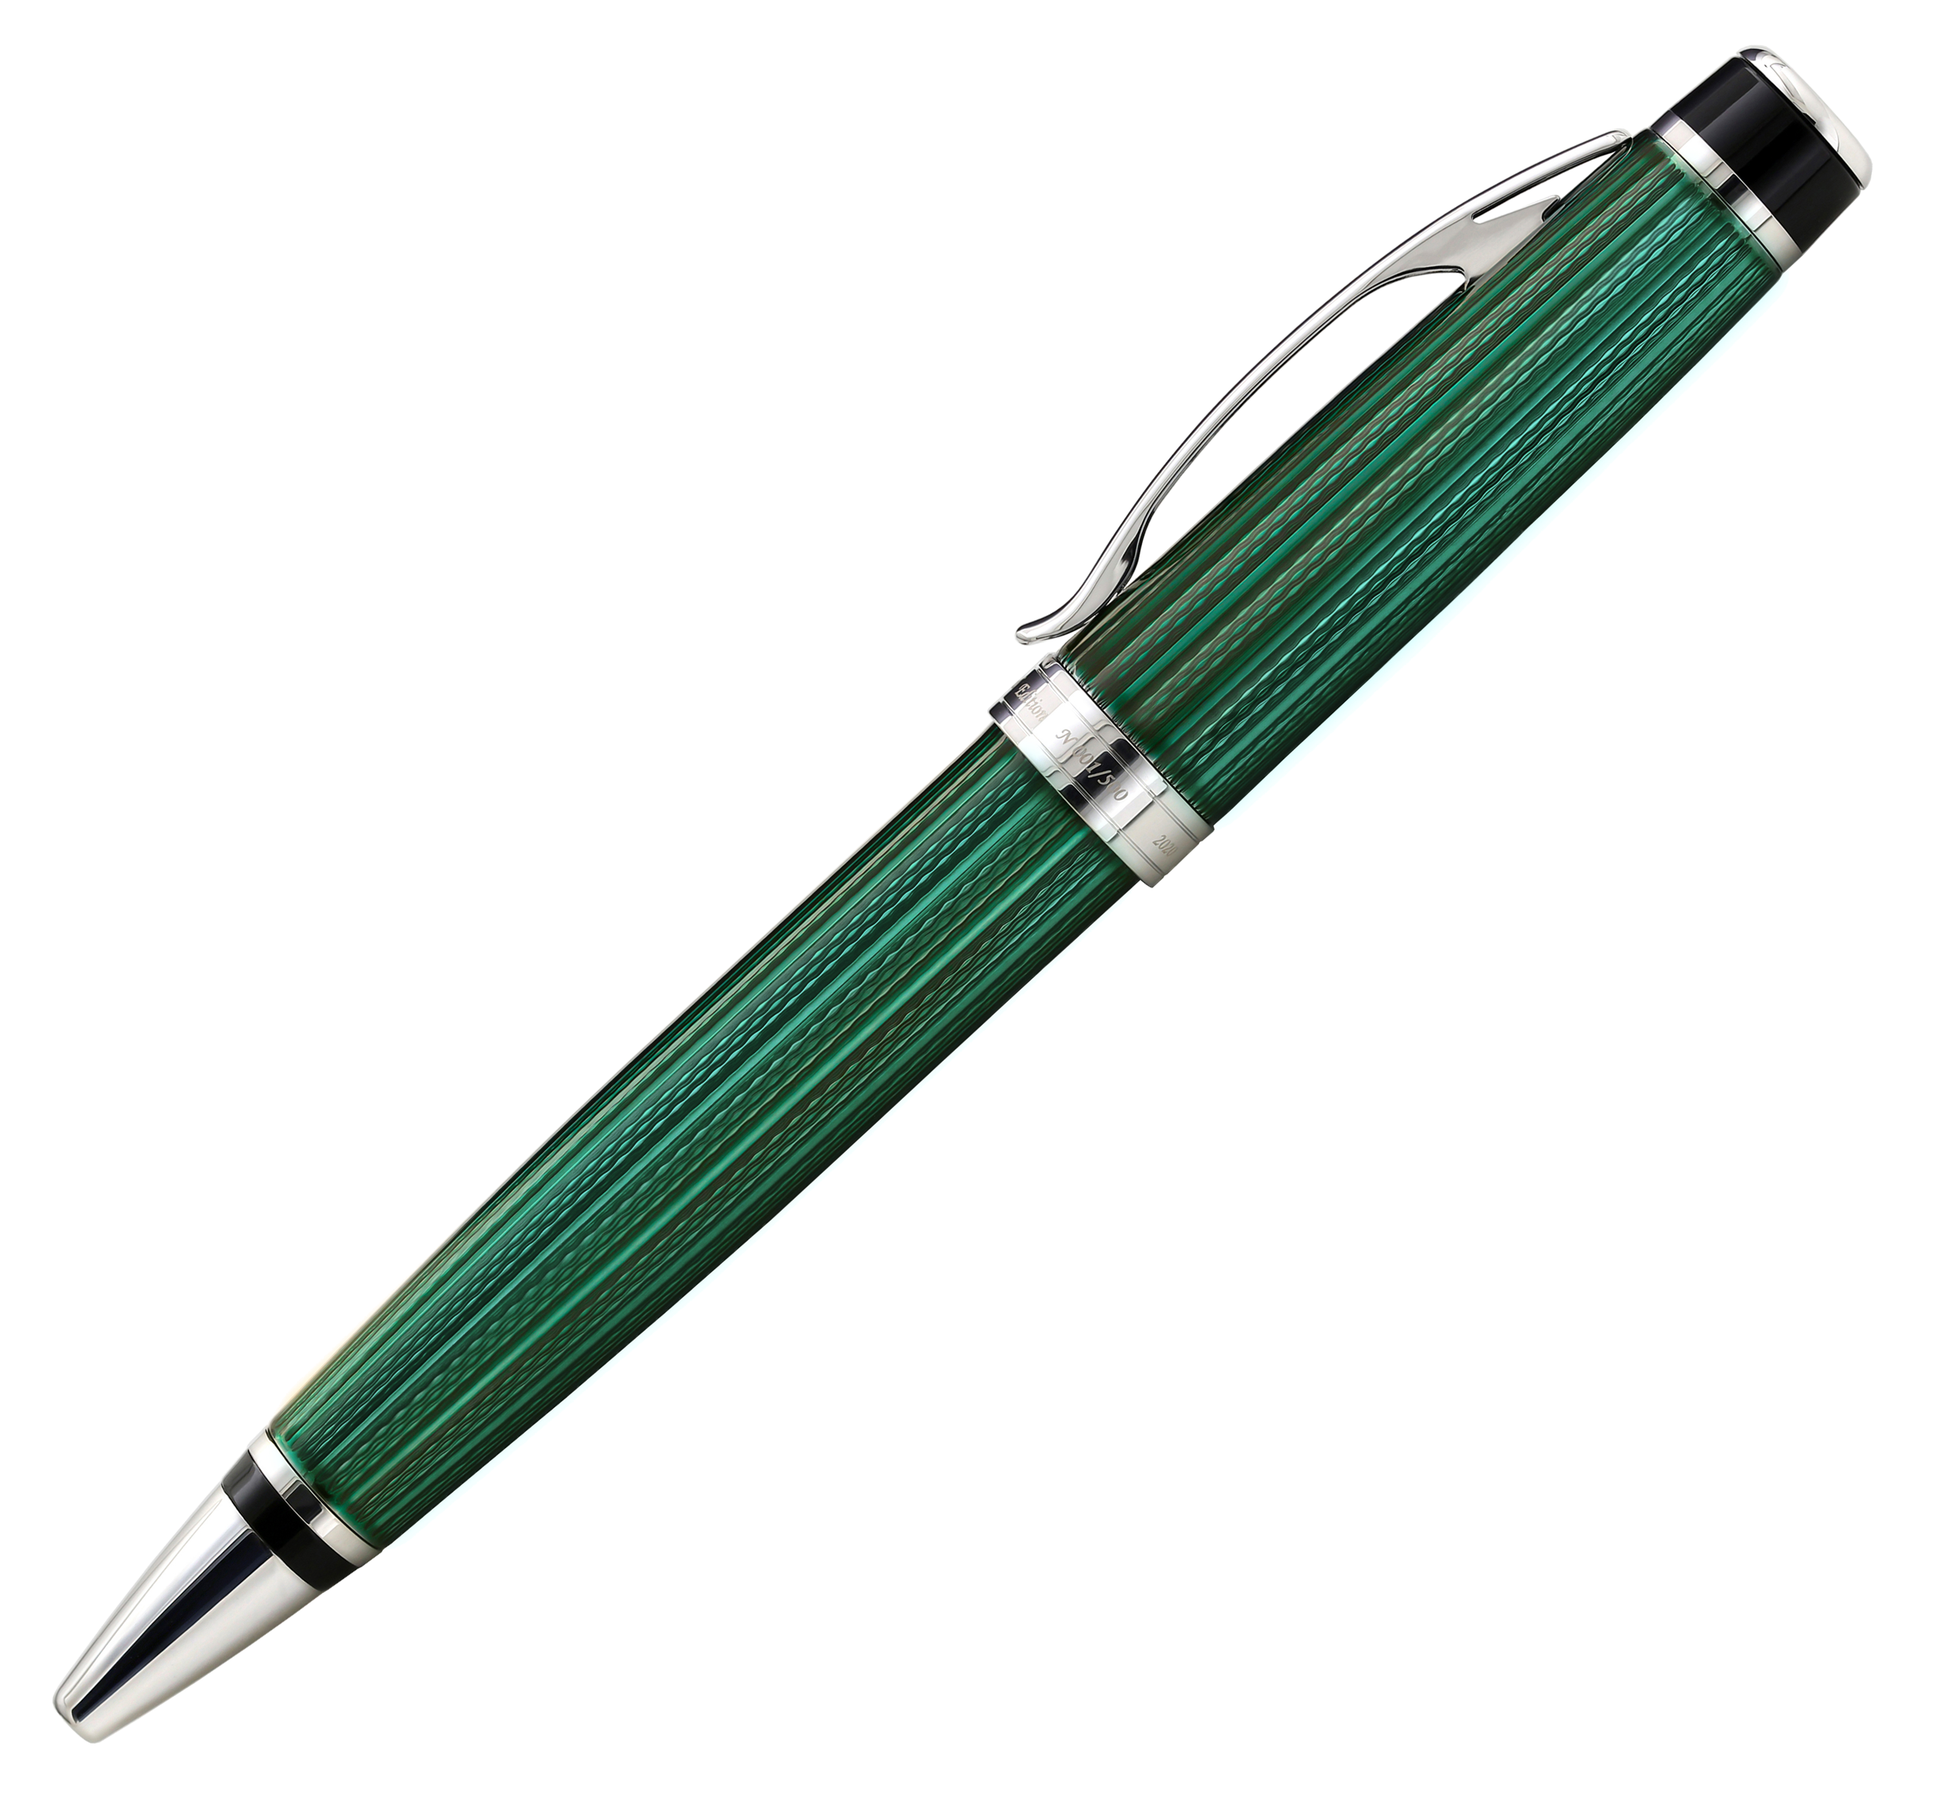 Xezo - Side view of the Incognito Forest B ballpoint pen